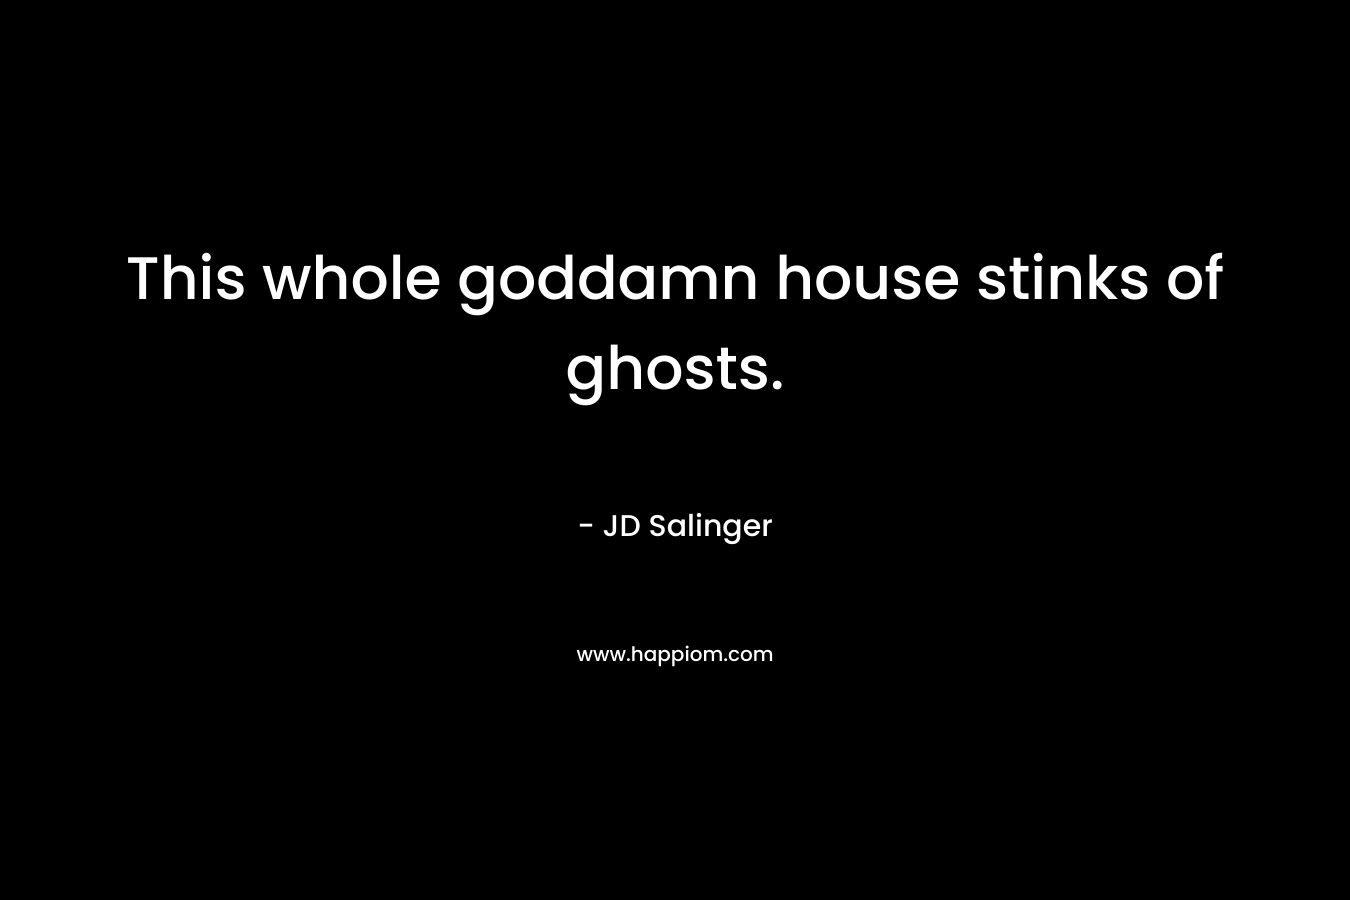 This whole goddamn house stinks of ghosts. – JD Salinger